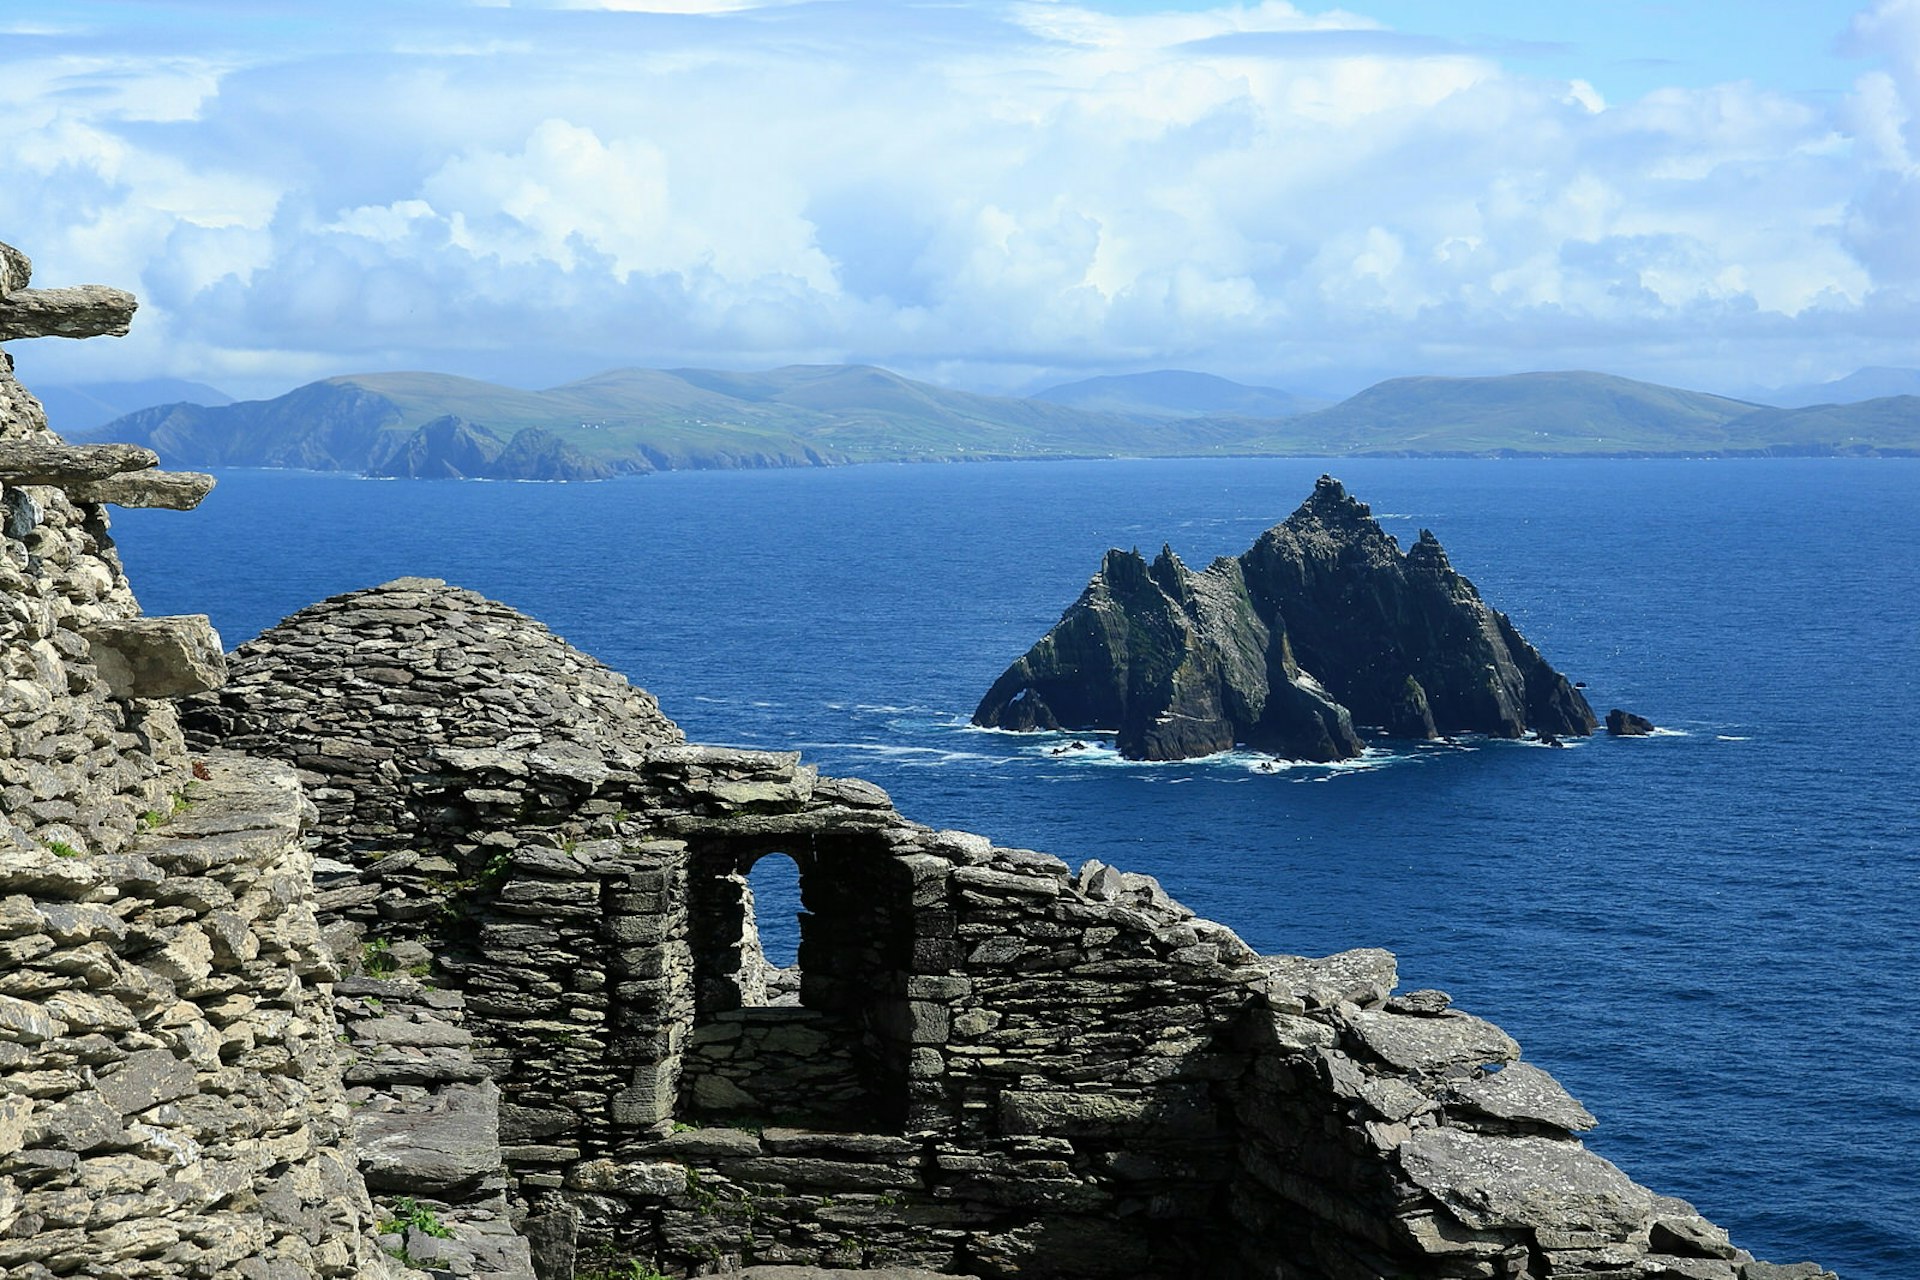 A view of Little Skellig and the County Kerry coastline from the top of Skellig Michael © Stefan Missing / Shutterstock